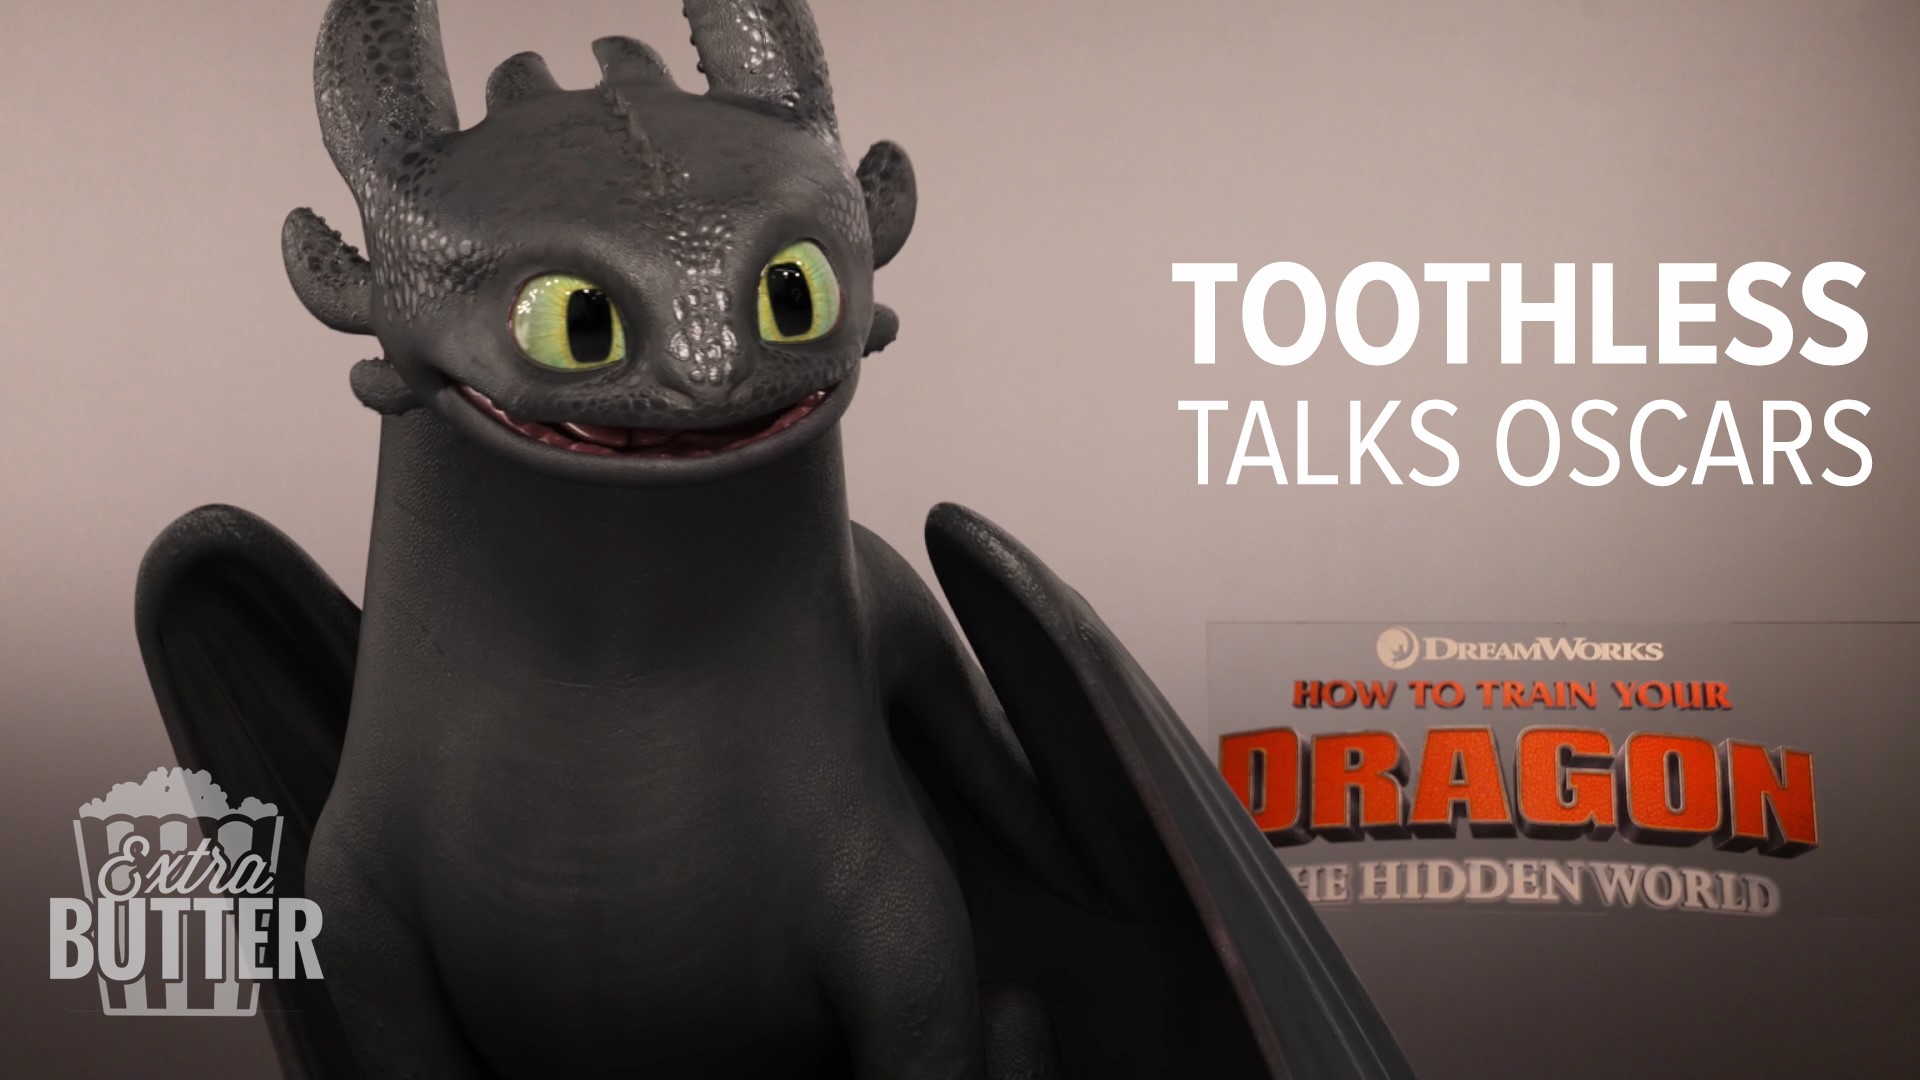 Toothless the Dragon stops by for an interview to talk about the movie, 'How to Train Your Dragon: The Hidden World.' Mark S. Allen also asks the dragon about the upcoming Oscars, and Toothless does not seem to be a big fan of Lady Gaga. Toothless also weighs in on working again with Jay Baruchel. Interview arranged by Universal Pictures.